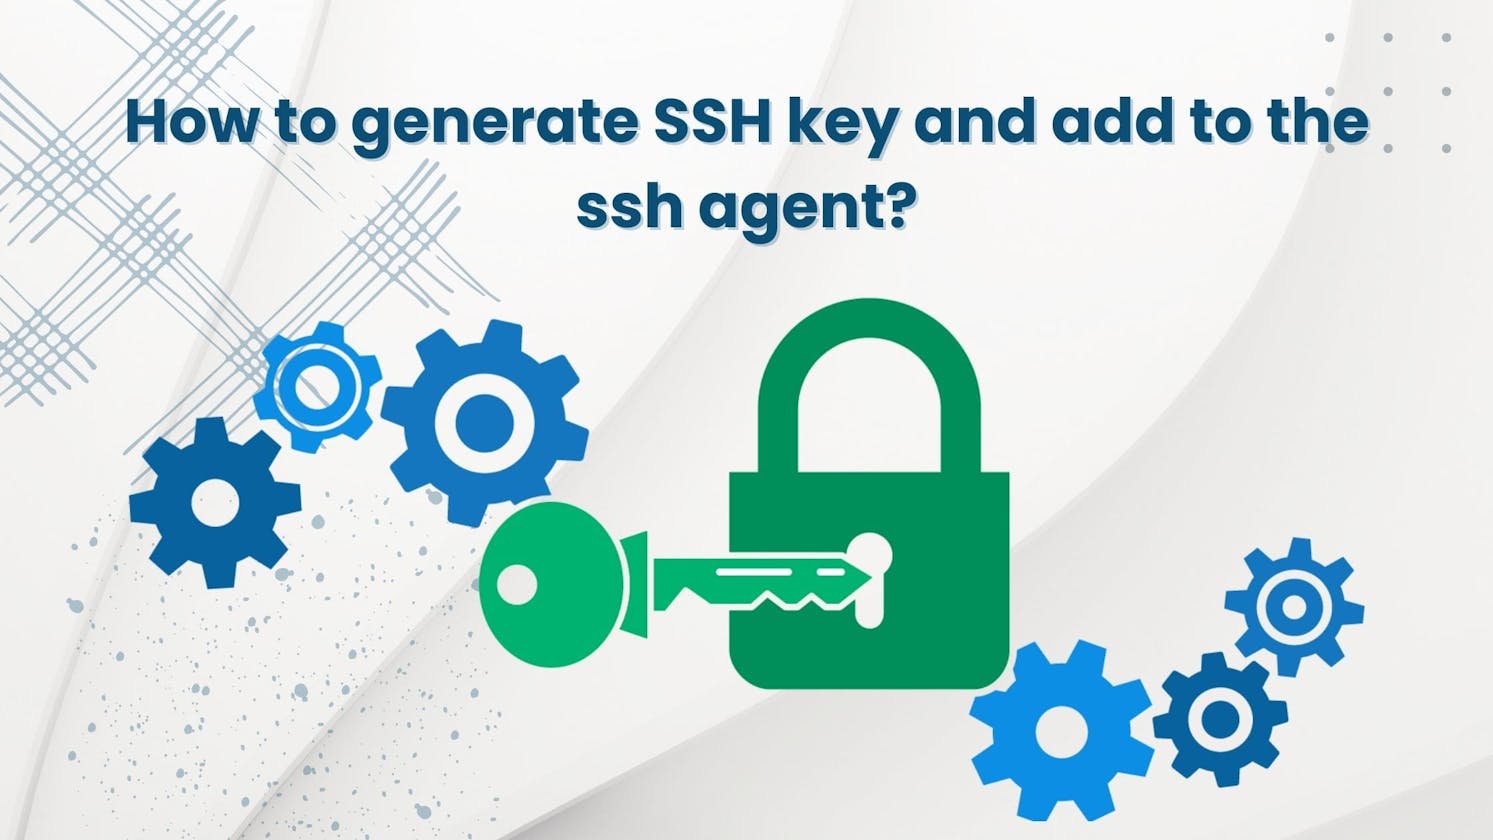 Generating a new SSH key and adding it to the ssh-agent